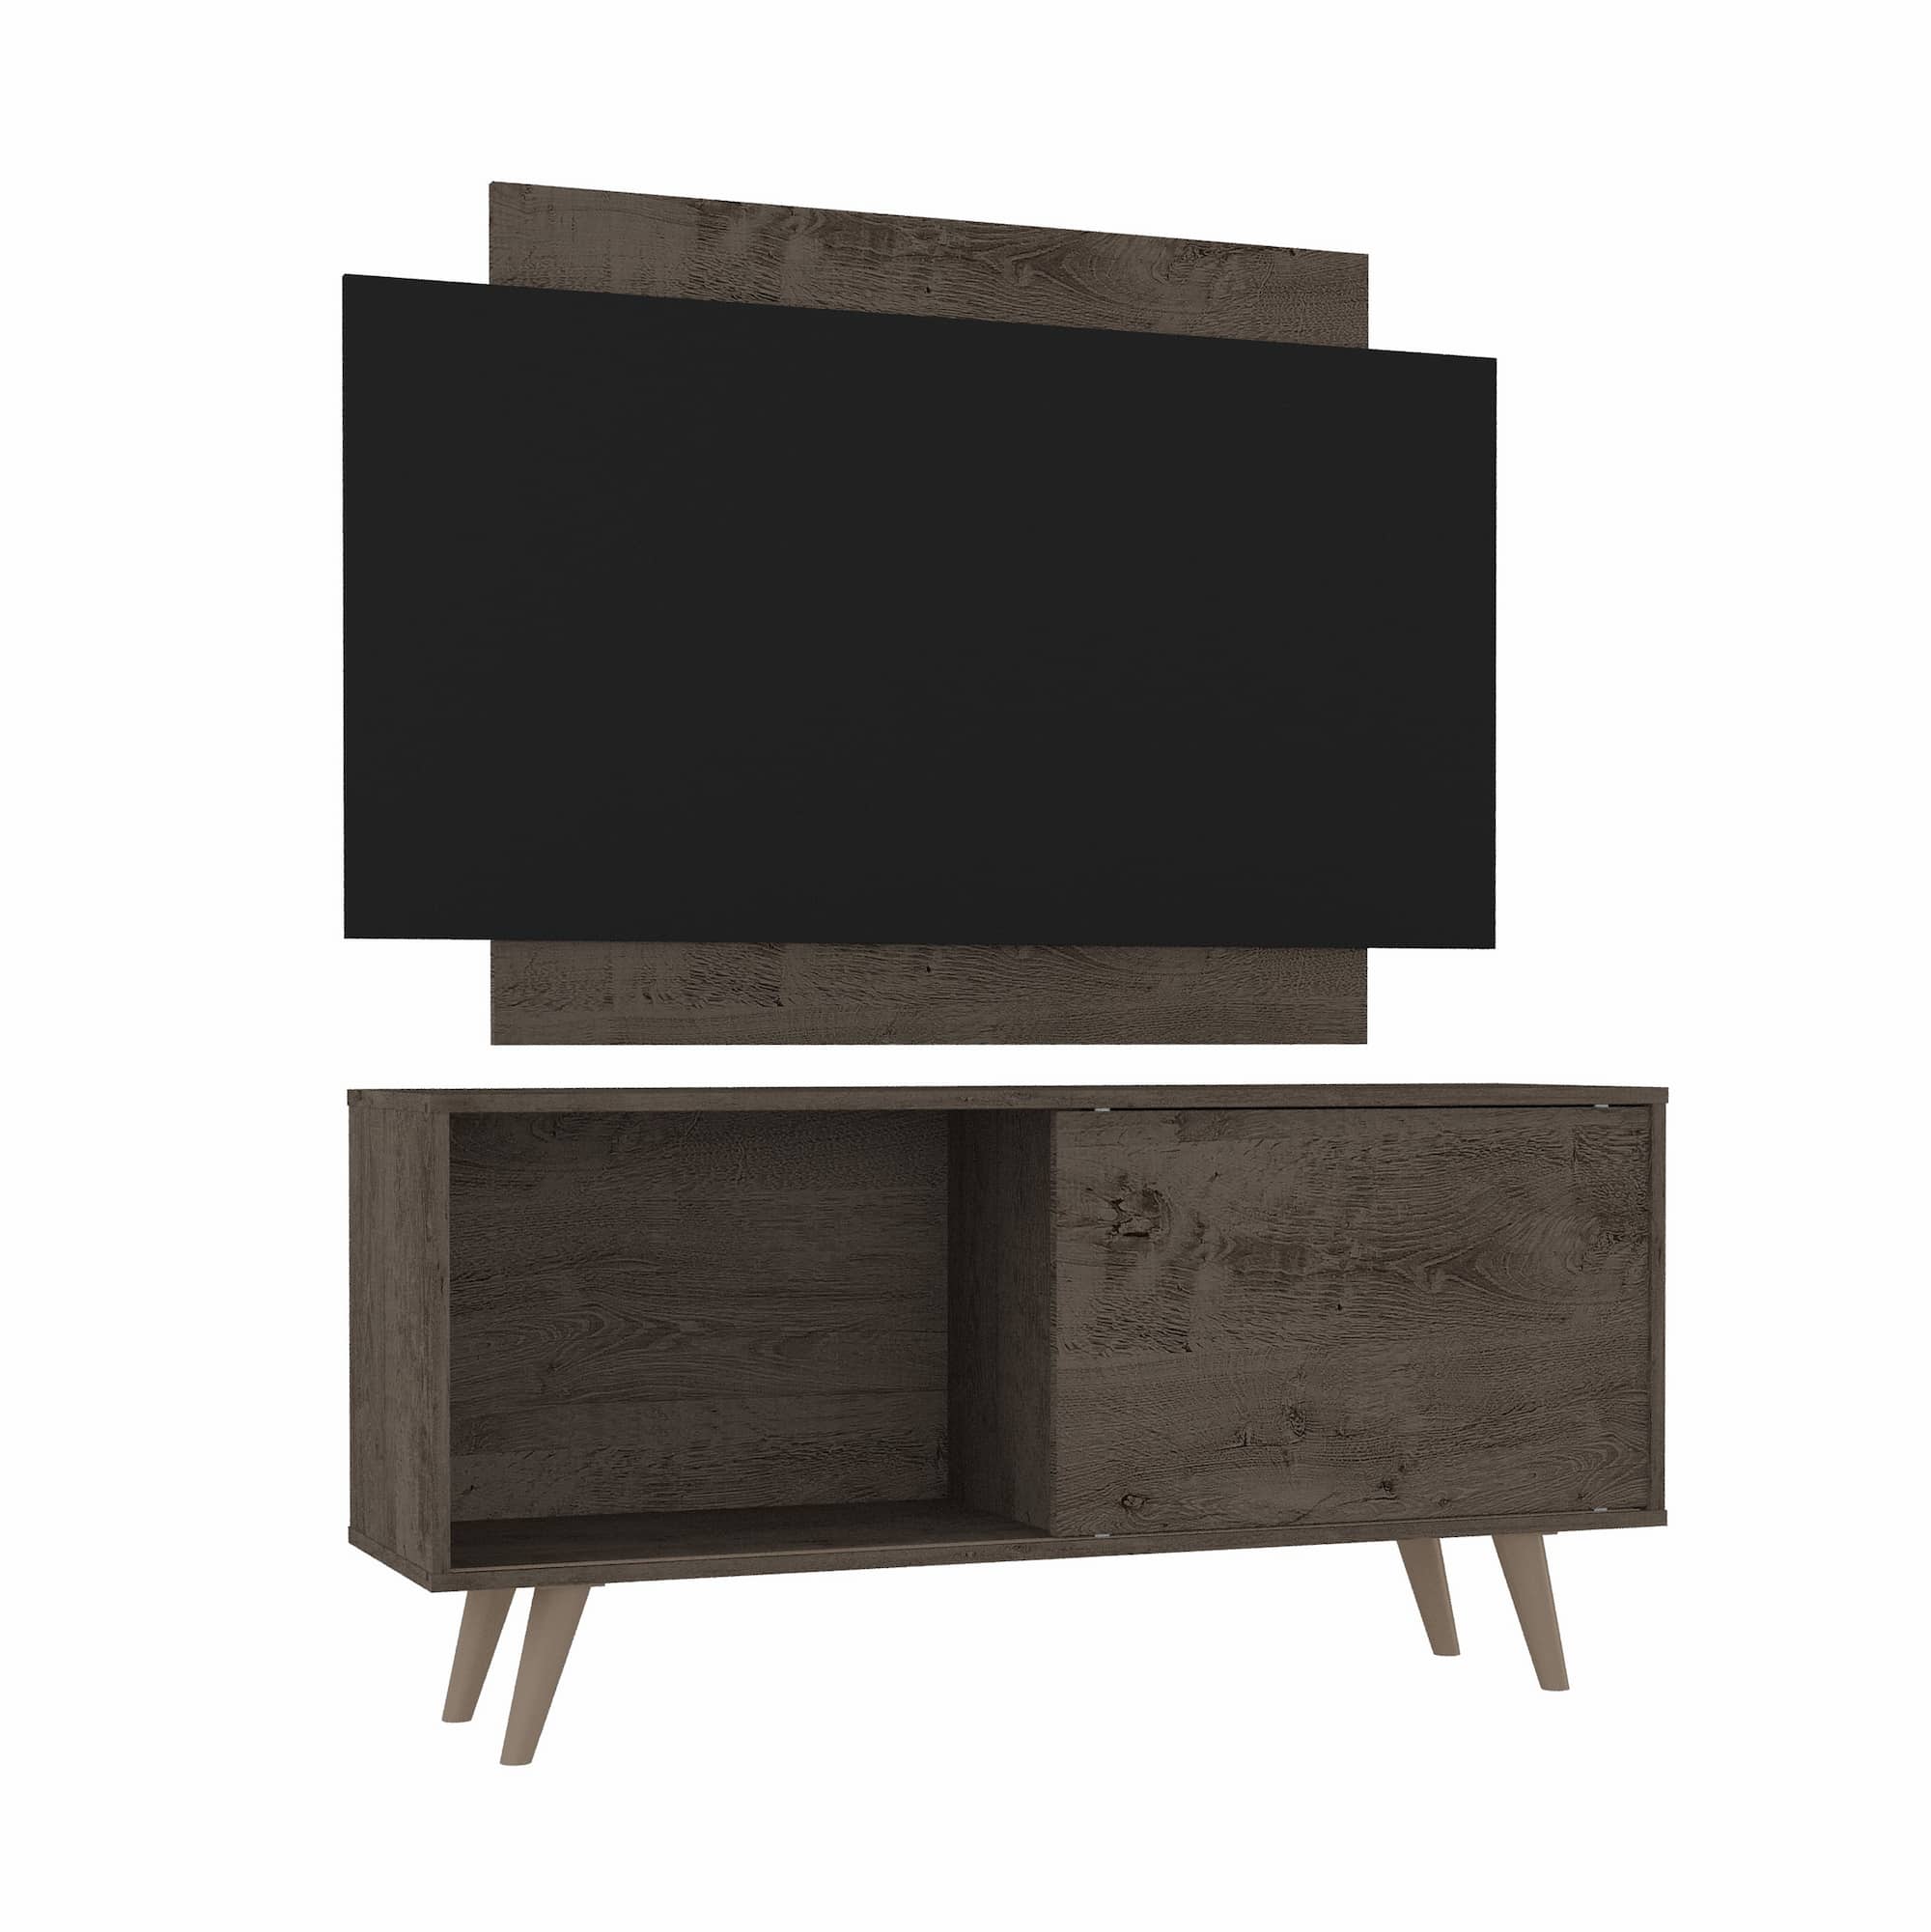 MALAGA TV STAND WITH PANEL RUSTIC BLACK 6